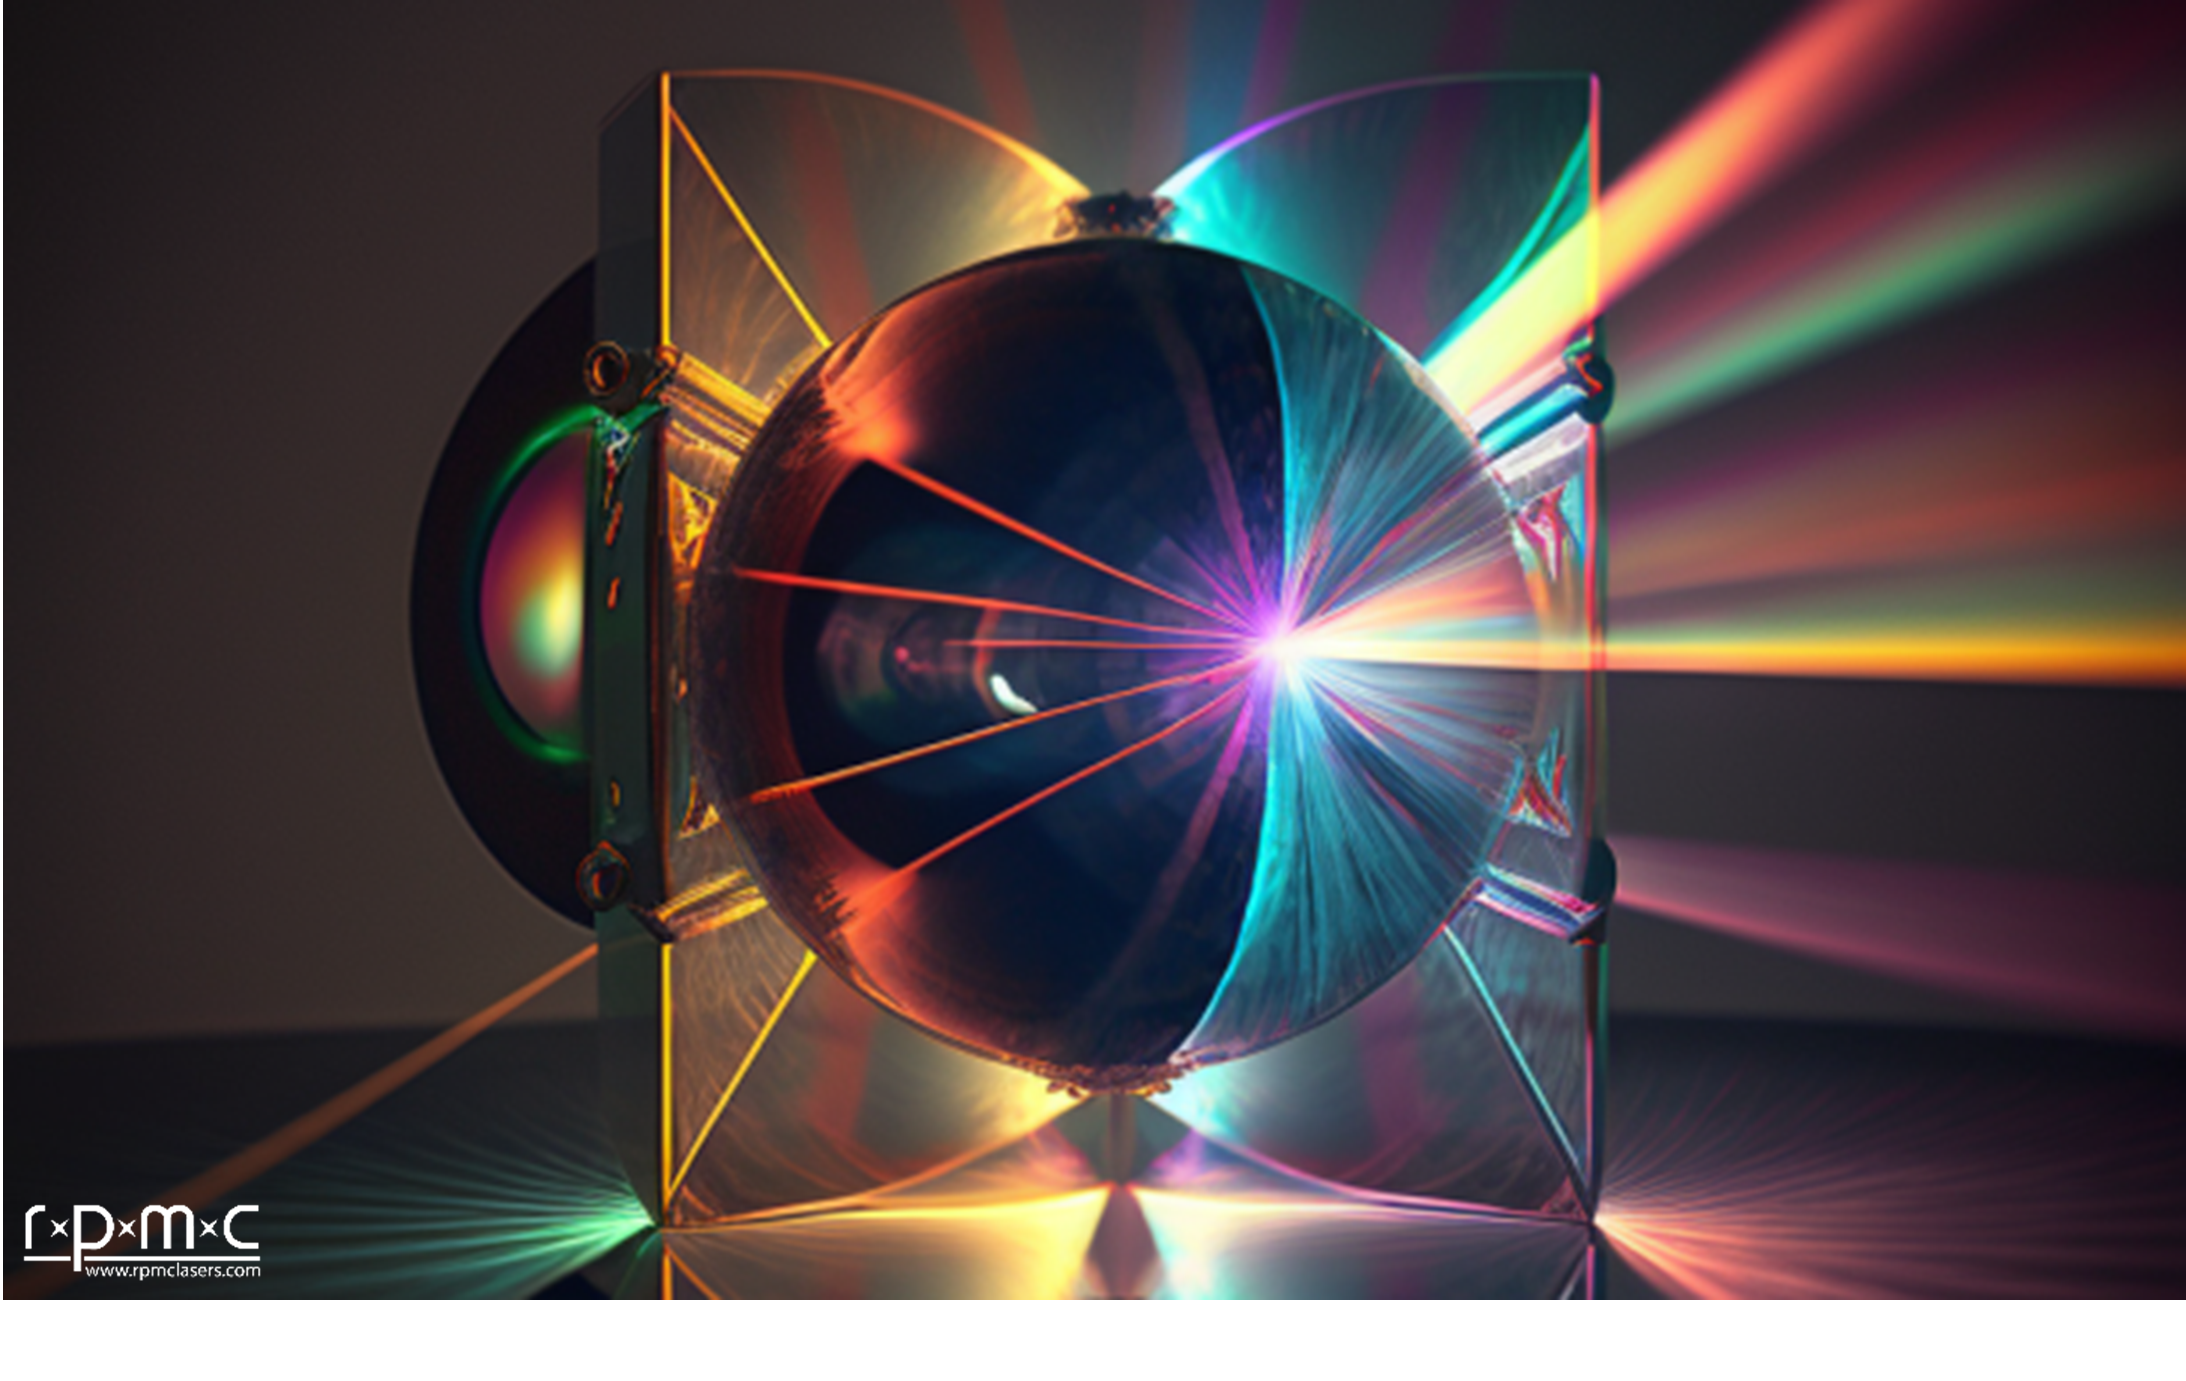 Image Industry News Ghostly Mirrors Revolutionize High-Power Lasers with Plasma Shrinking Size Significantly